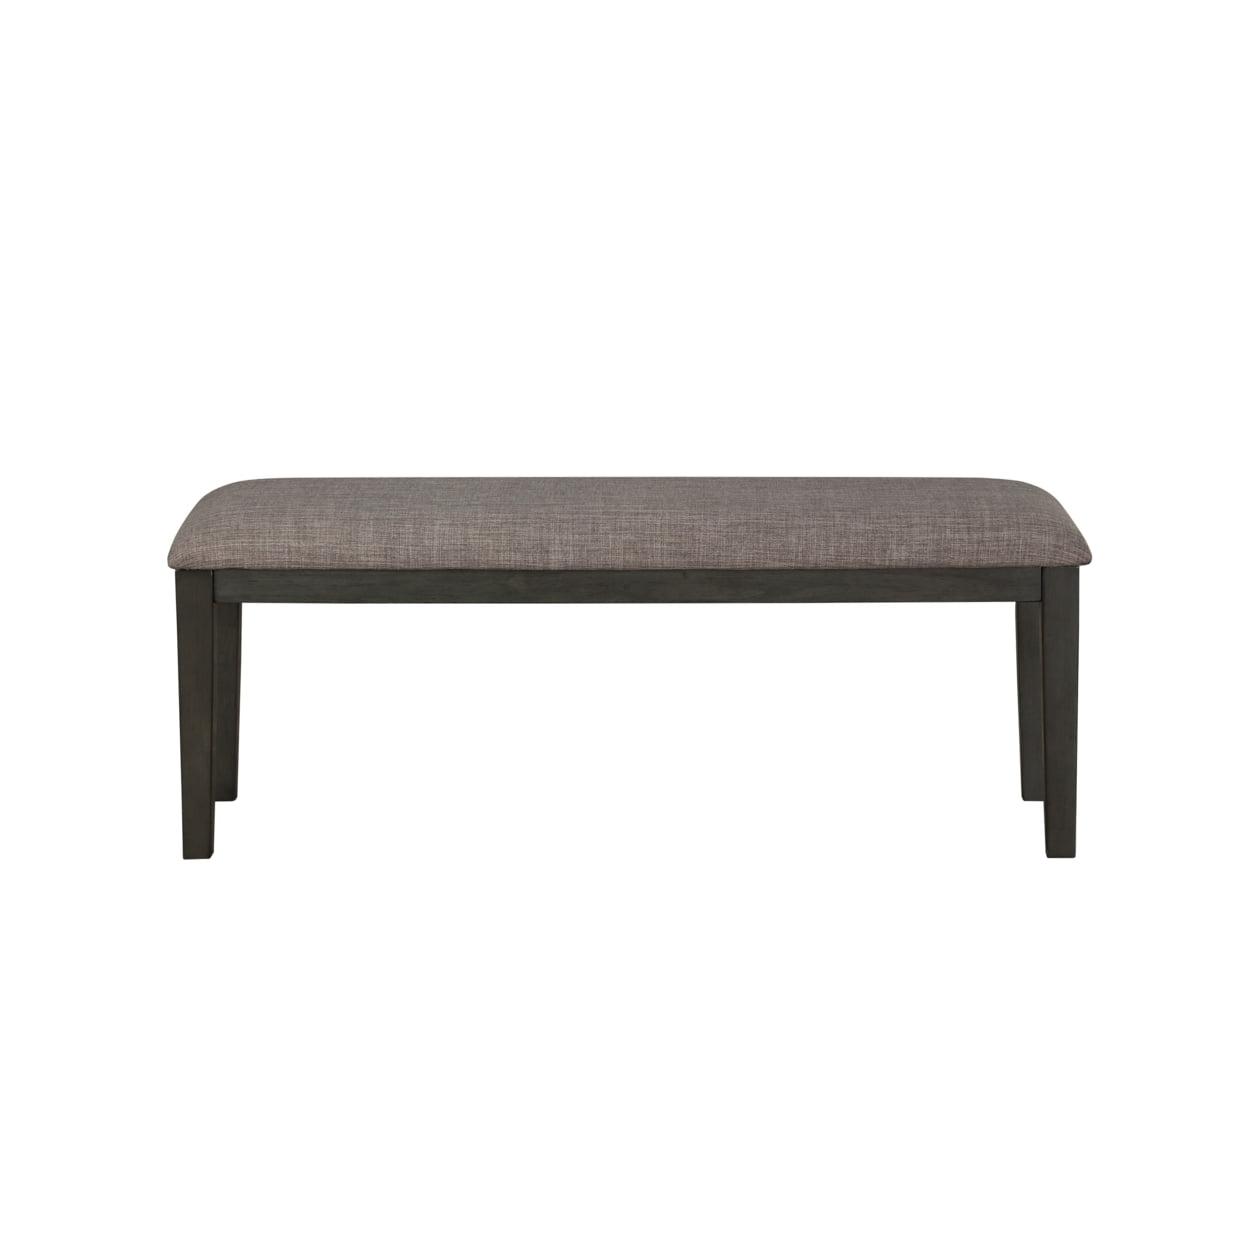 Sophisticated Gray and Beige Fabric Upholstered Wooden Bench